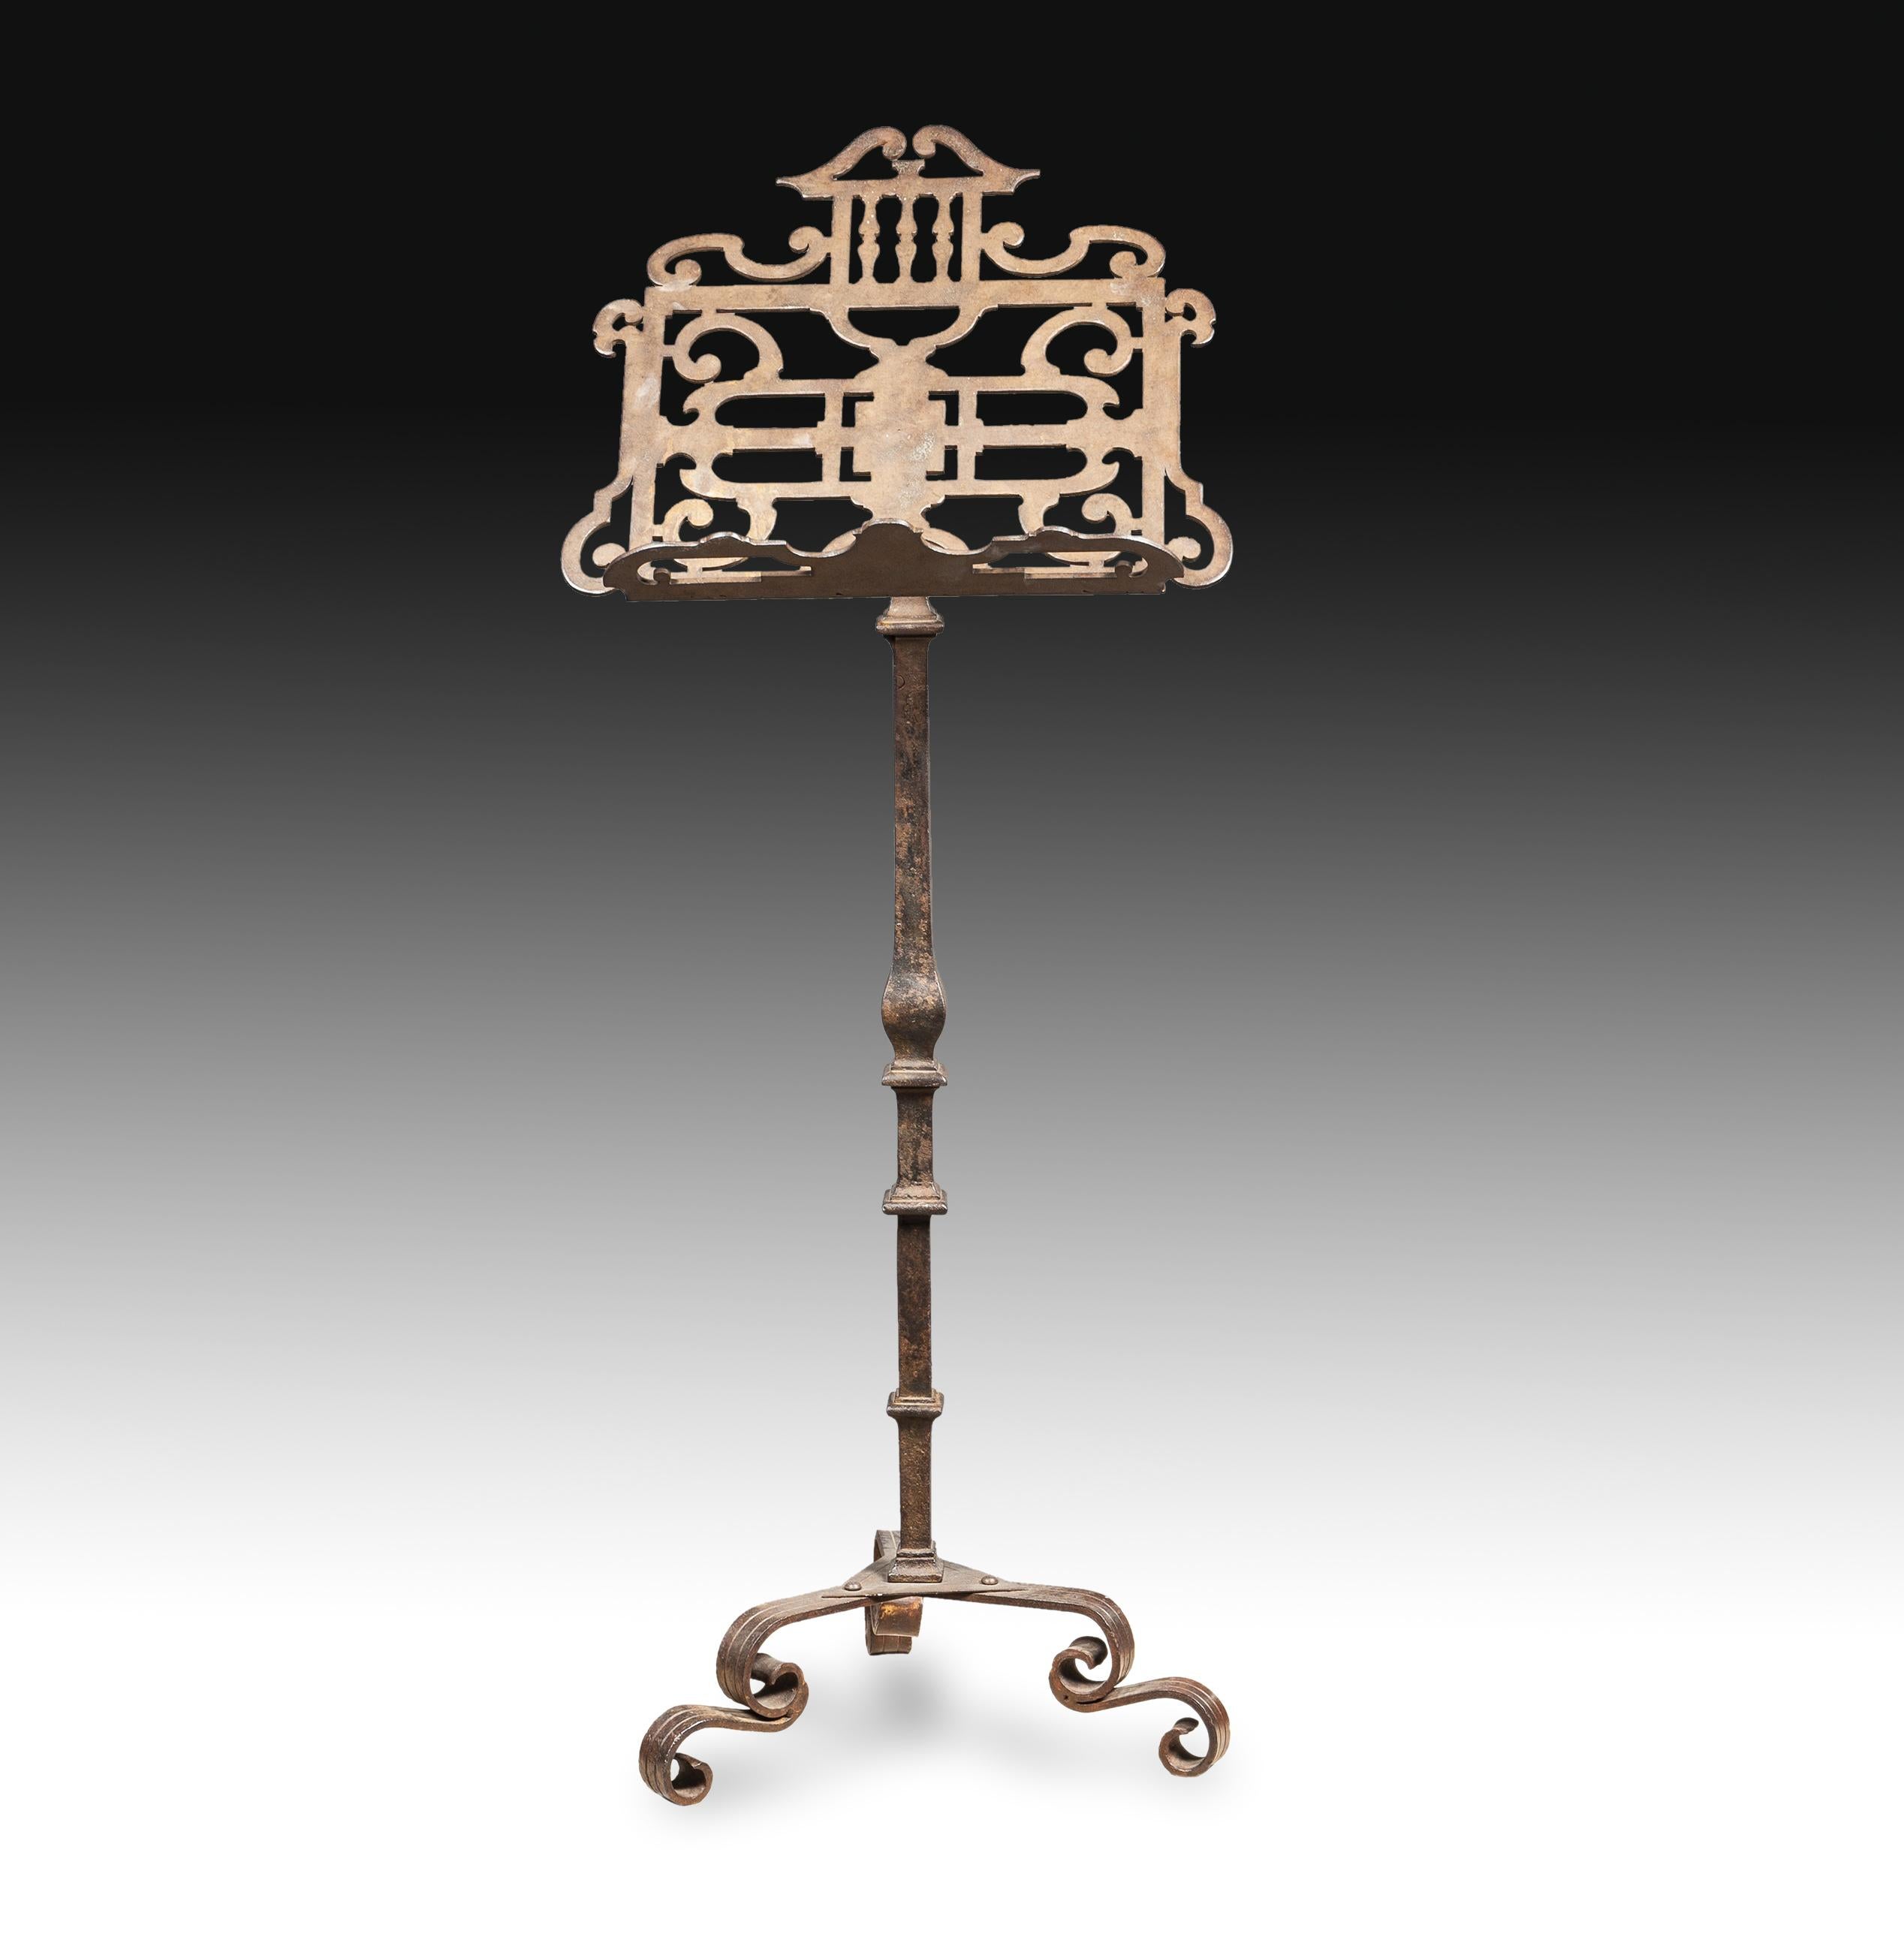 On three legs with scrolls stands a foot decorated with bulging forms and a flame towards the center, which holds and raises the lectern, which stands out for its architectural elements and simplified vegetables inspired by classical antiquity. The